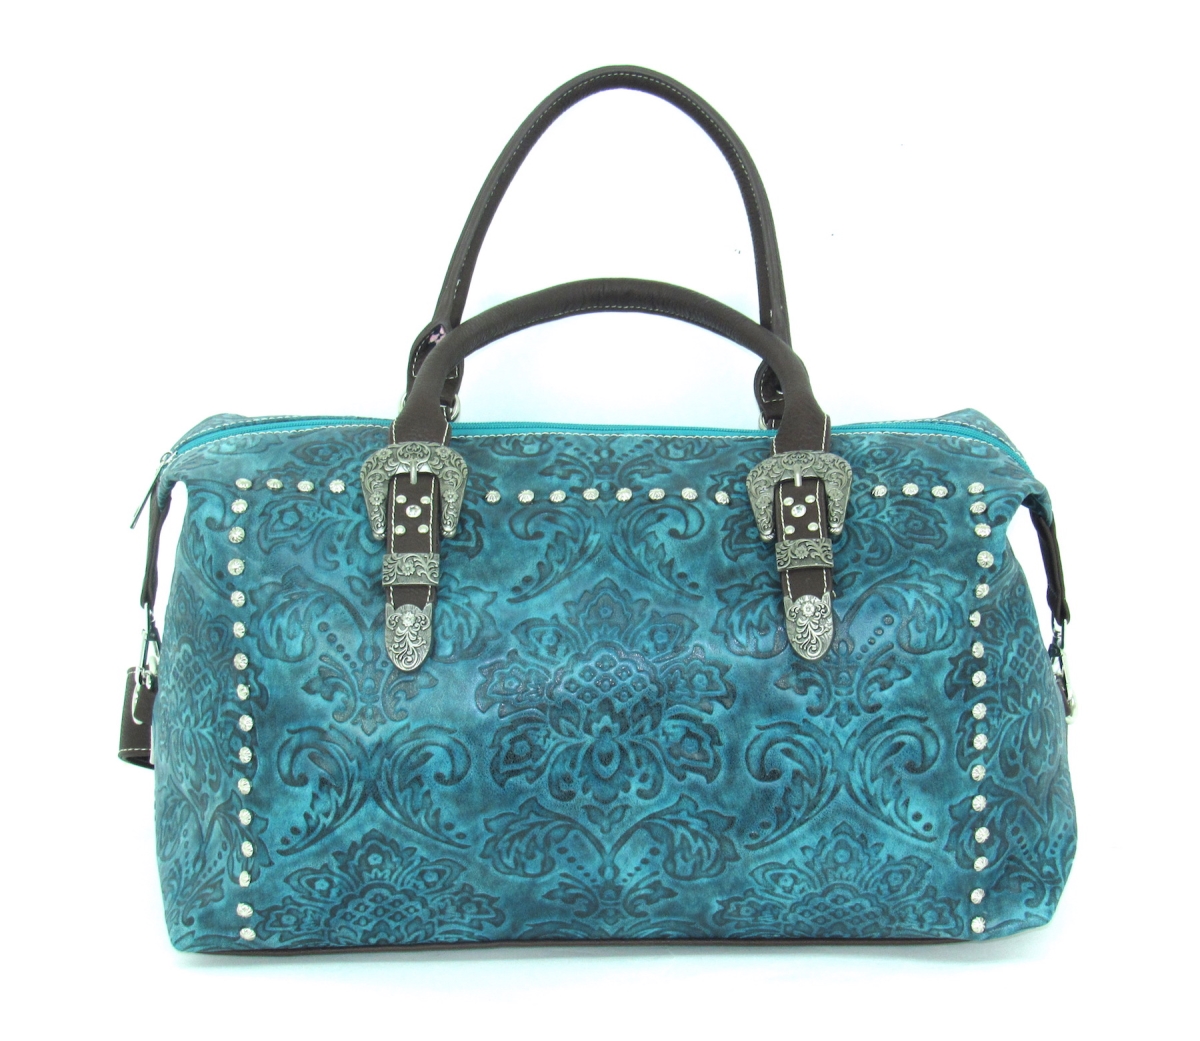 No.to-160 Tq Ladies Faux Leather Tooled Duffle Bag, Turquoise